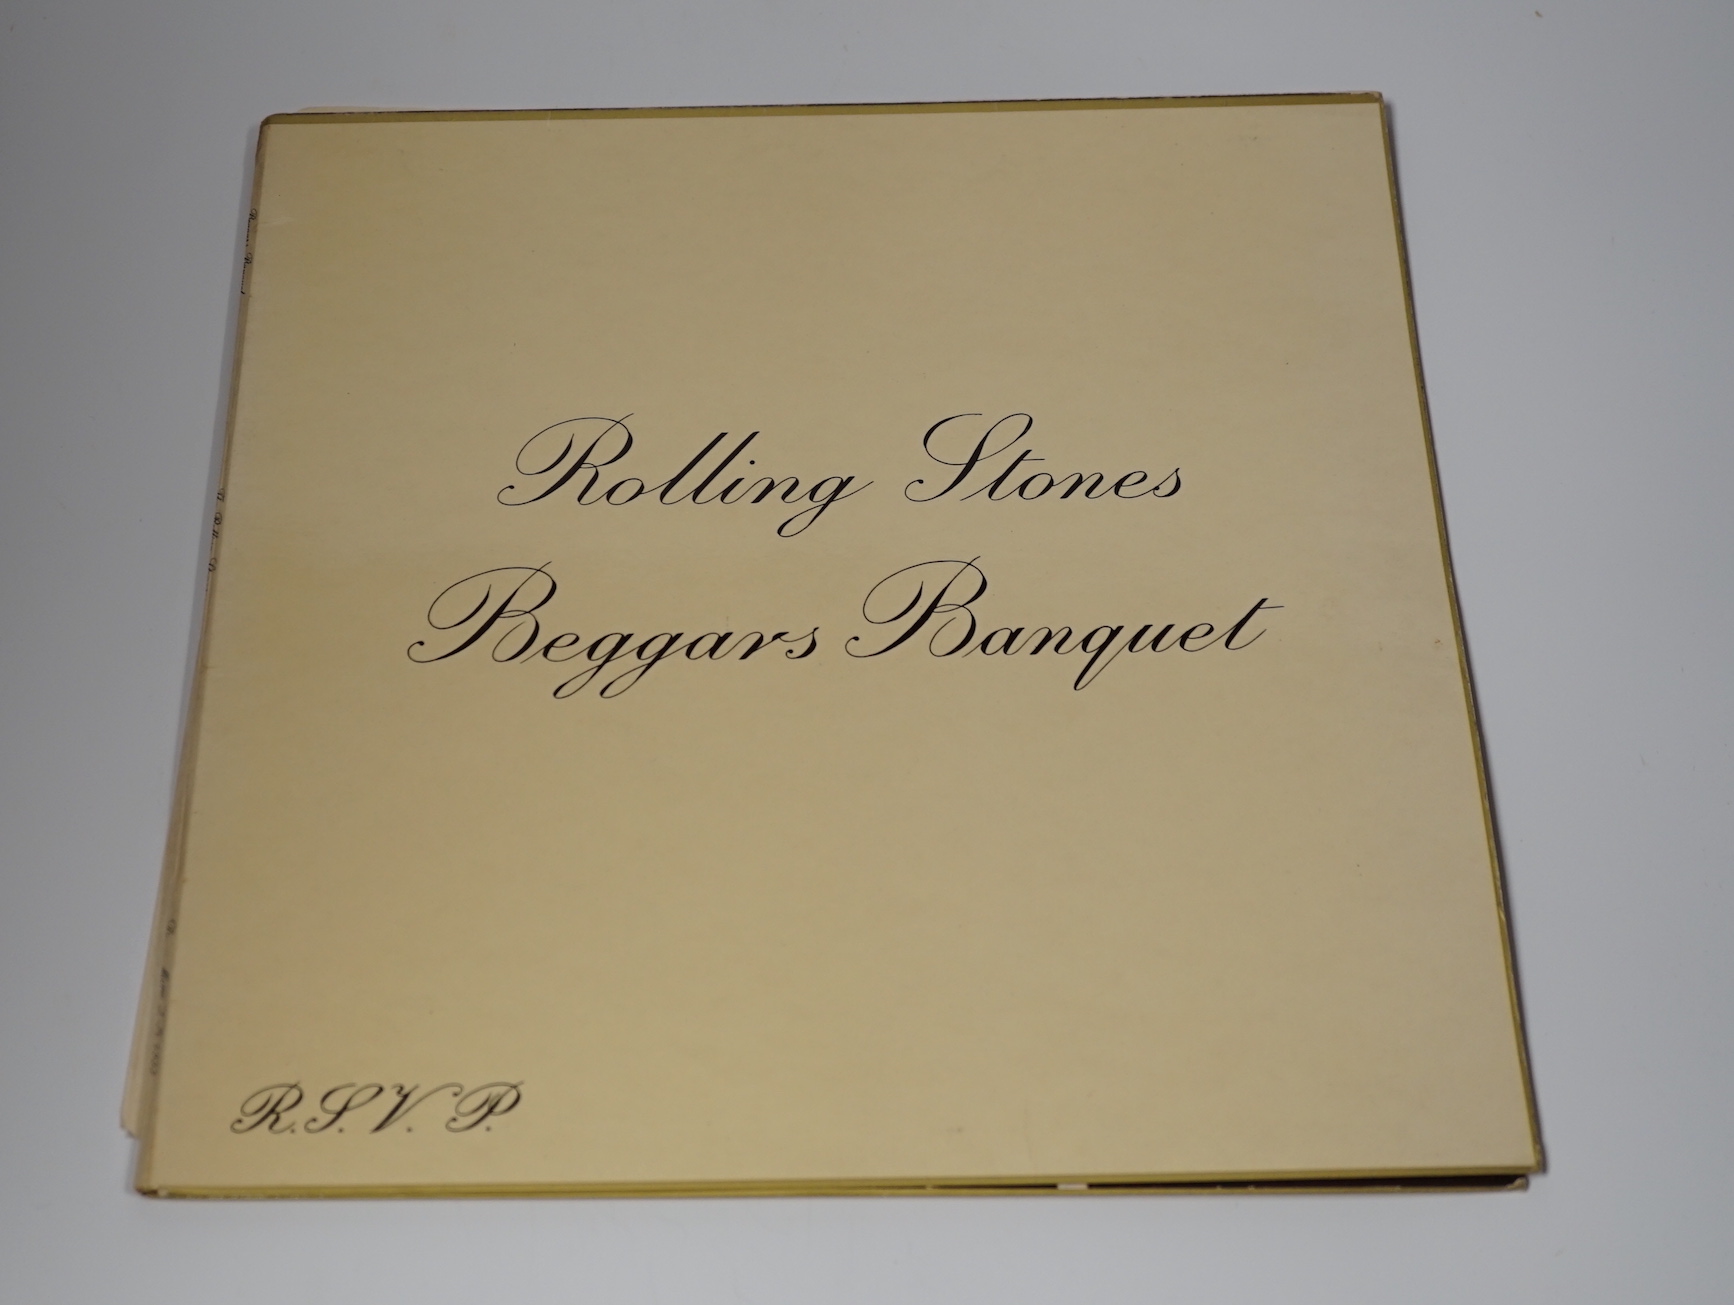 Rolling Stones; beggars banquet, LP record album, first mono pressing on red DECCA label, LK.4955, XARL-8476-4A, in gatefold sleeve                                                                                         